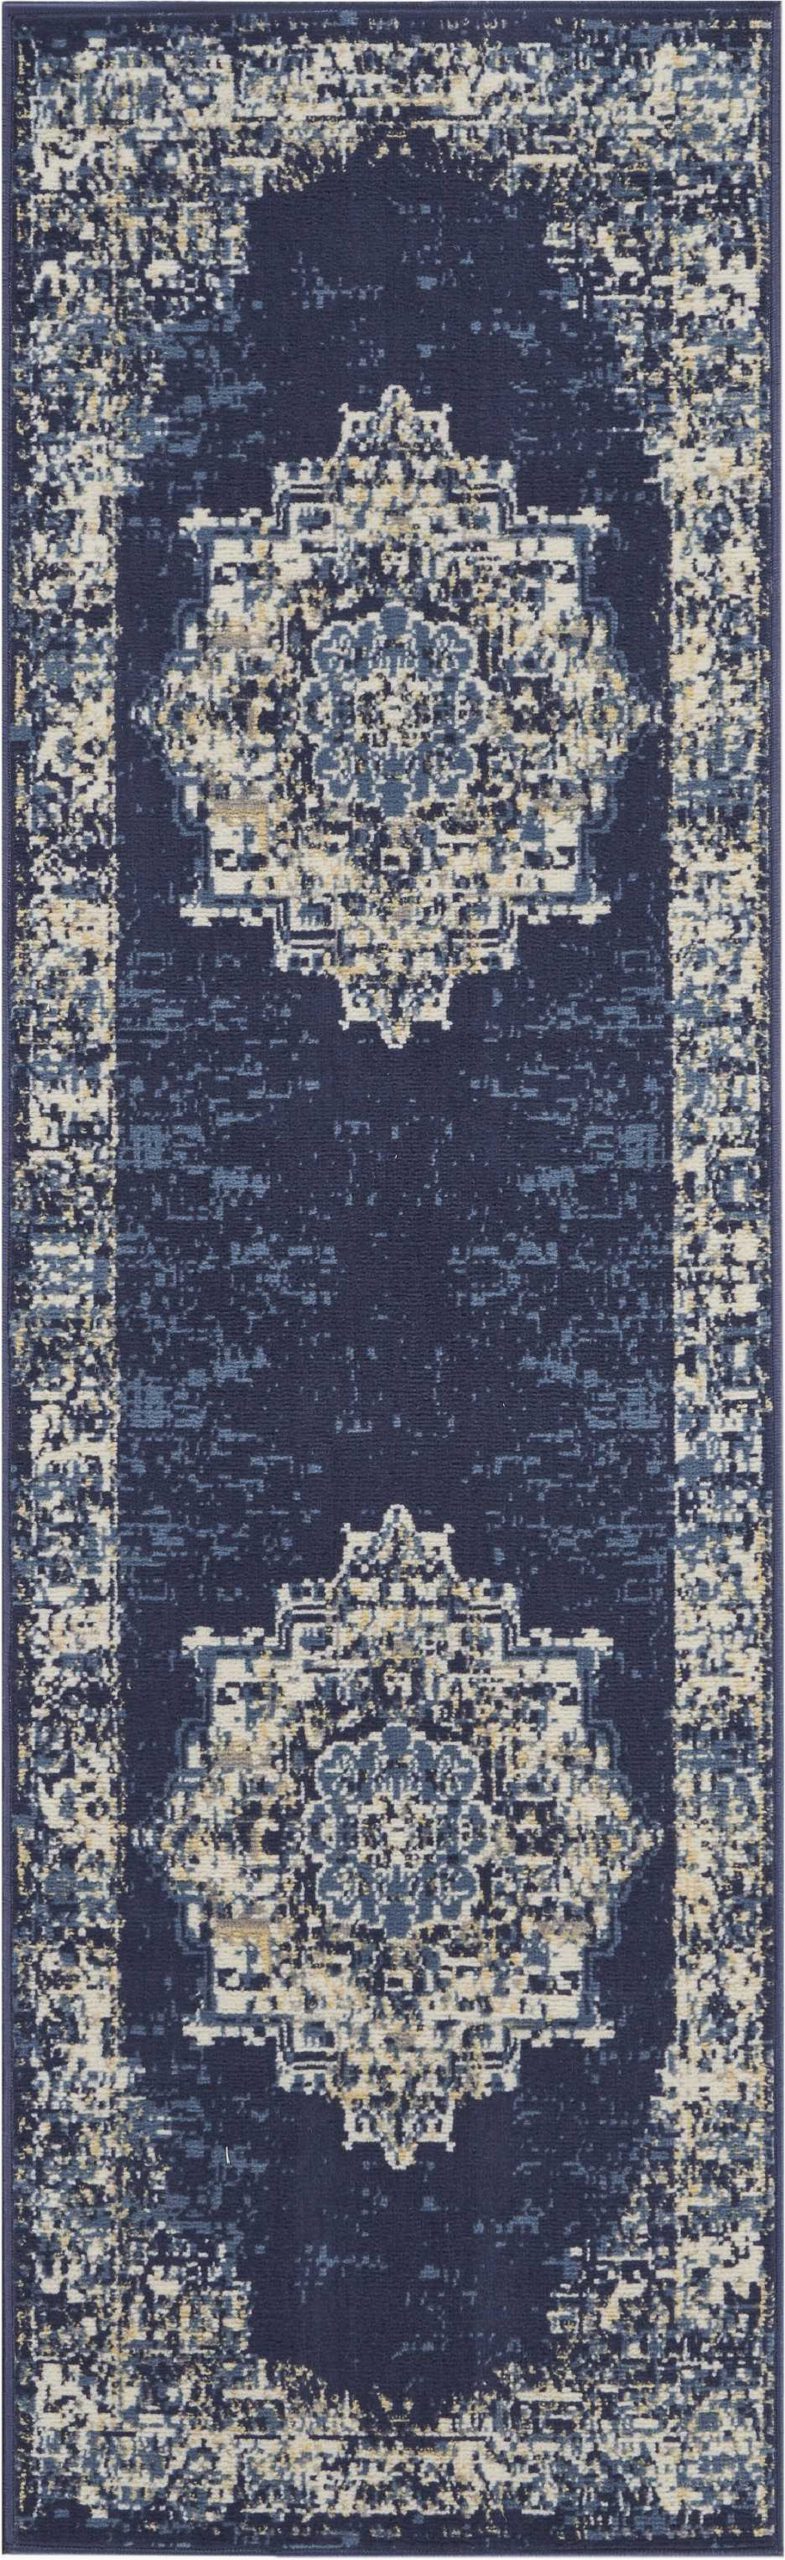 blue runner area rugs c a1247 a1249